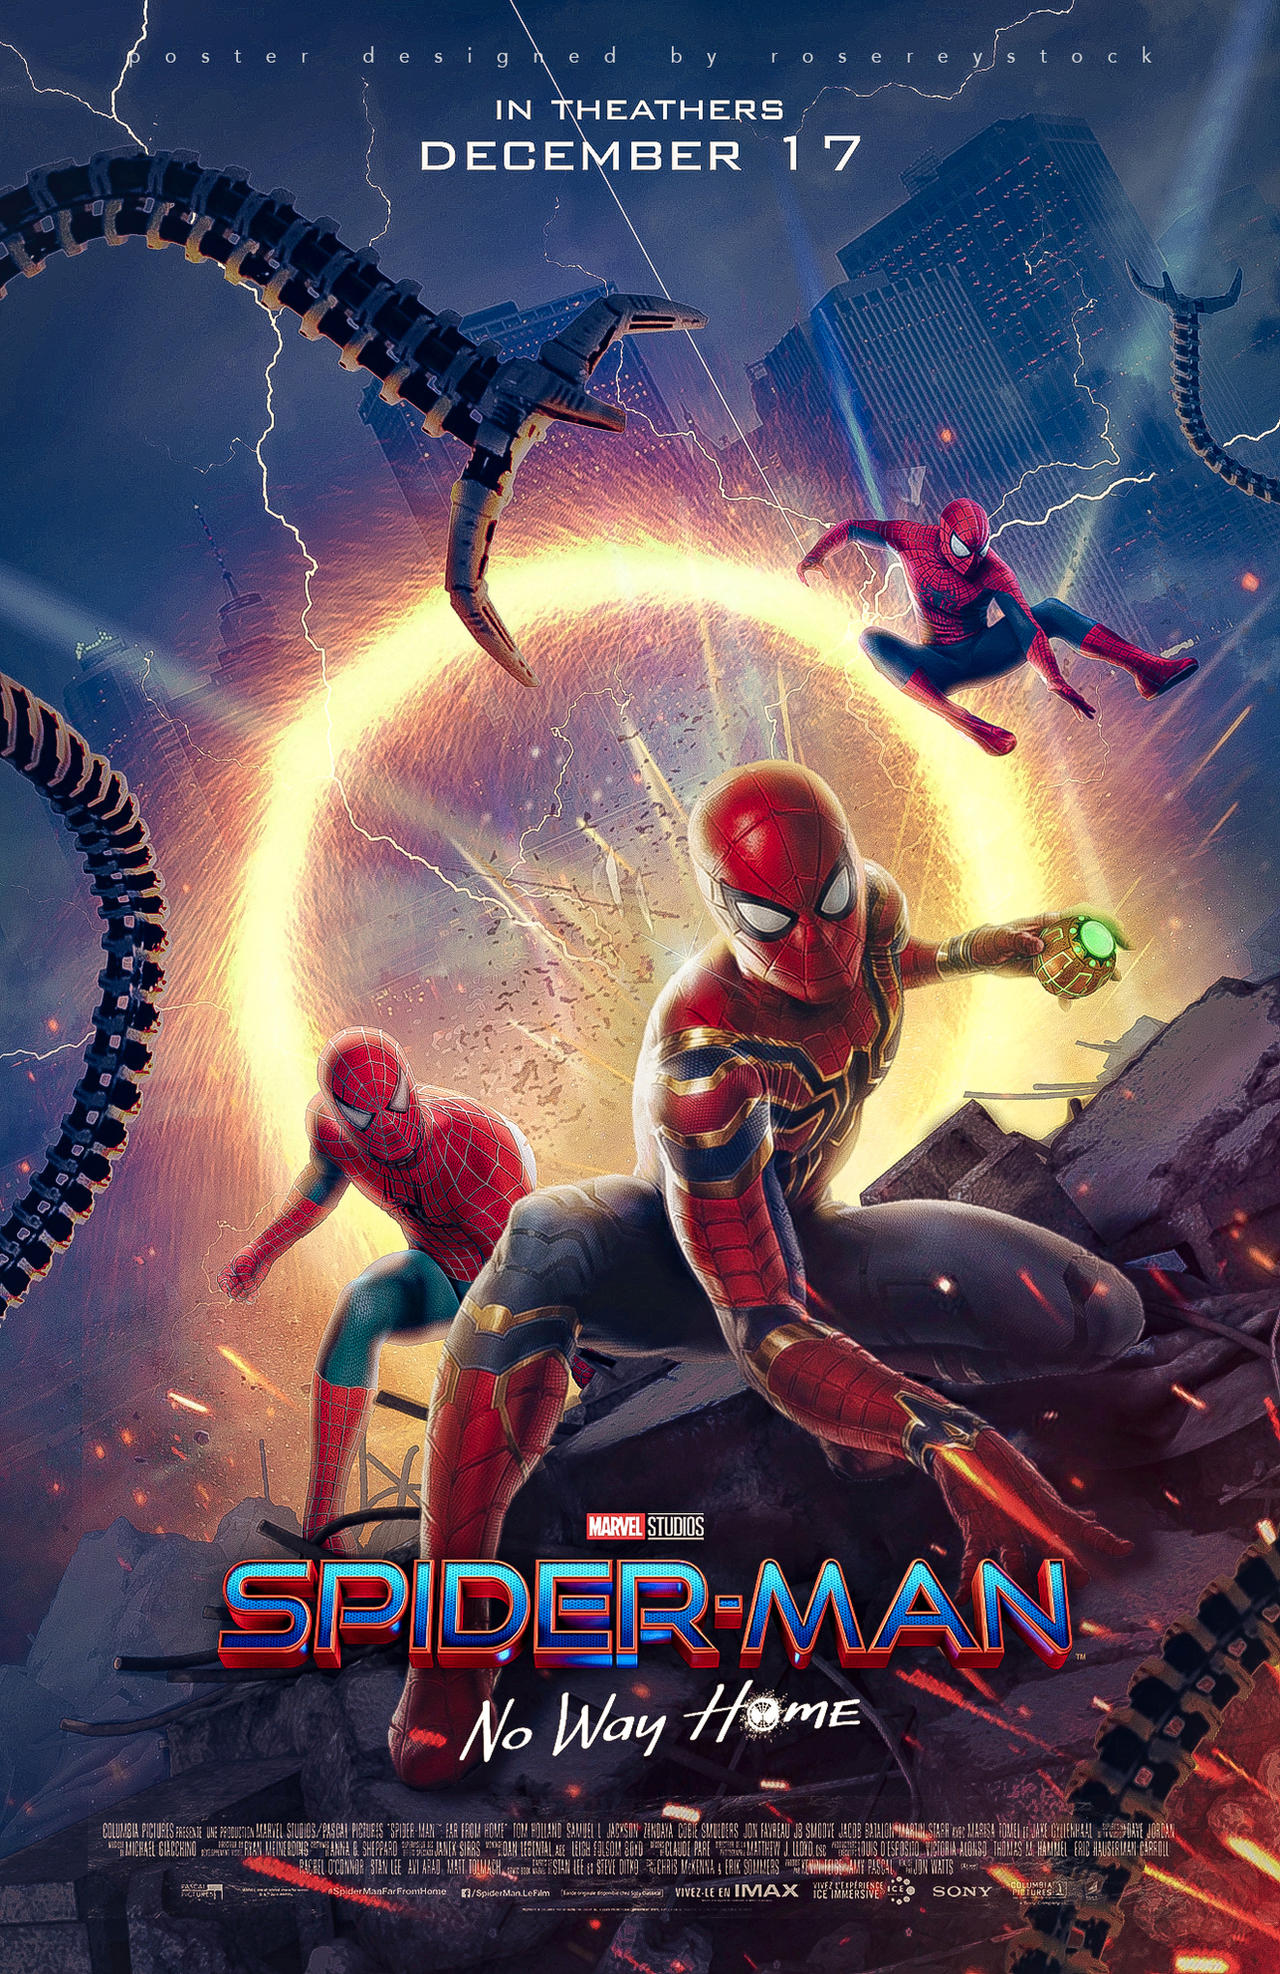 Spiderman No Way Home poster 3 by Rosereystock on DeviantArt